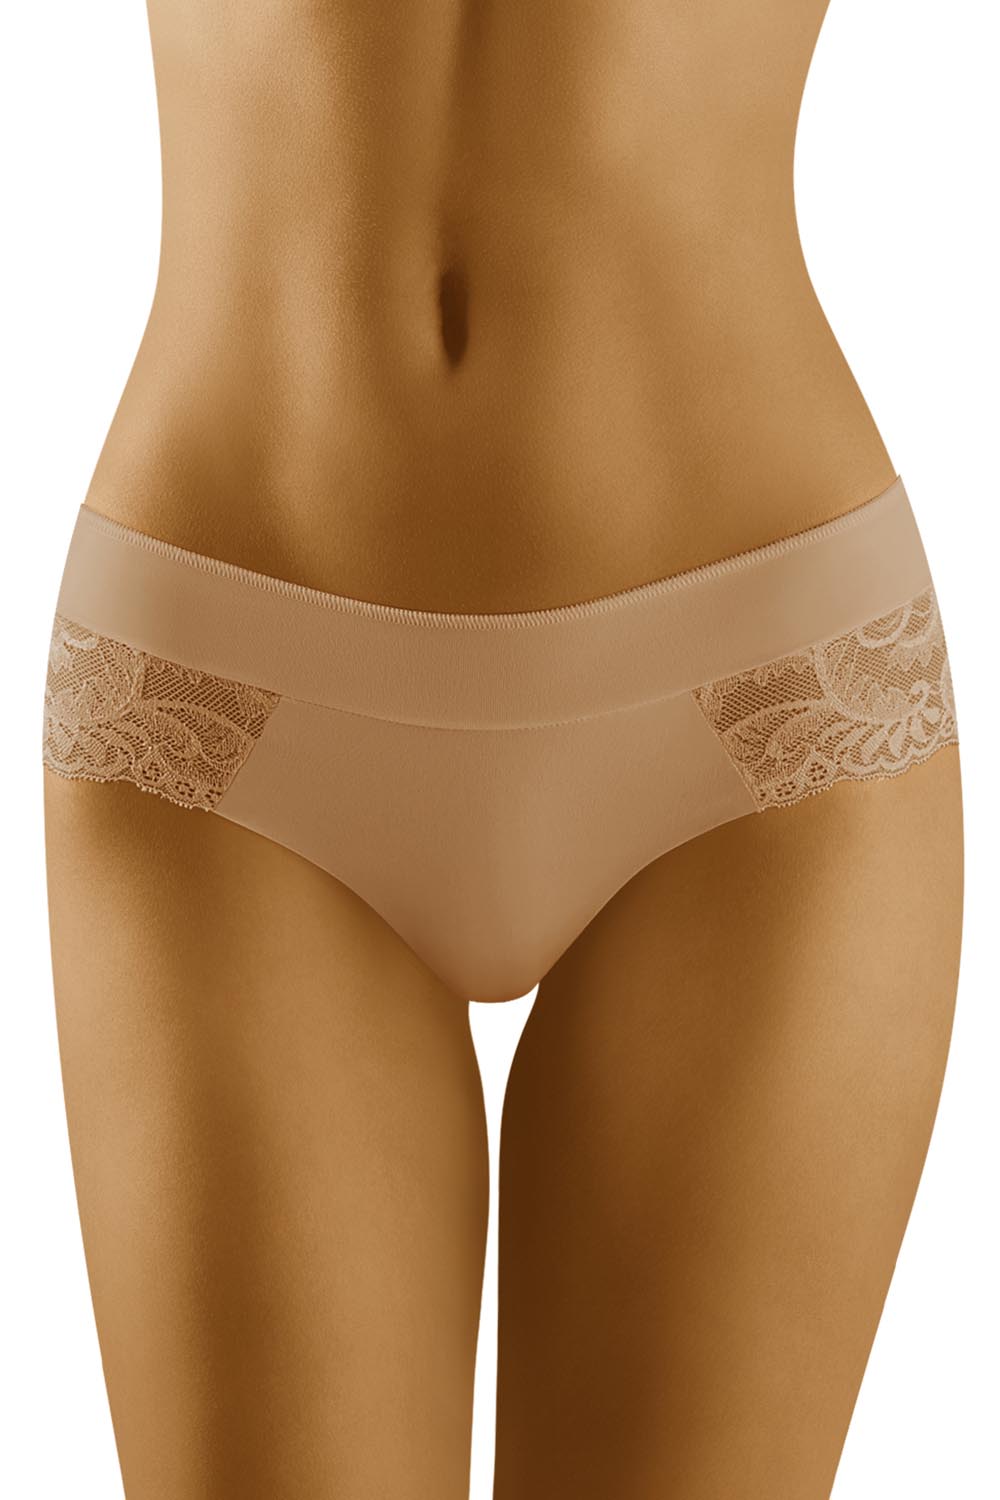 Wolbar women's briefs WB318 New Panties Comfortable Underwear,Top Quality